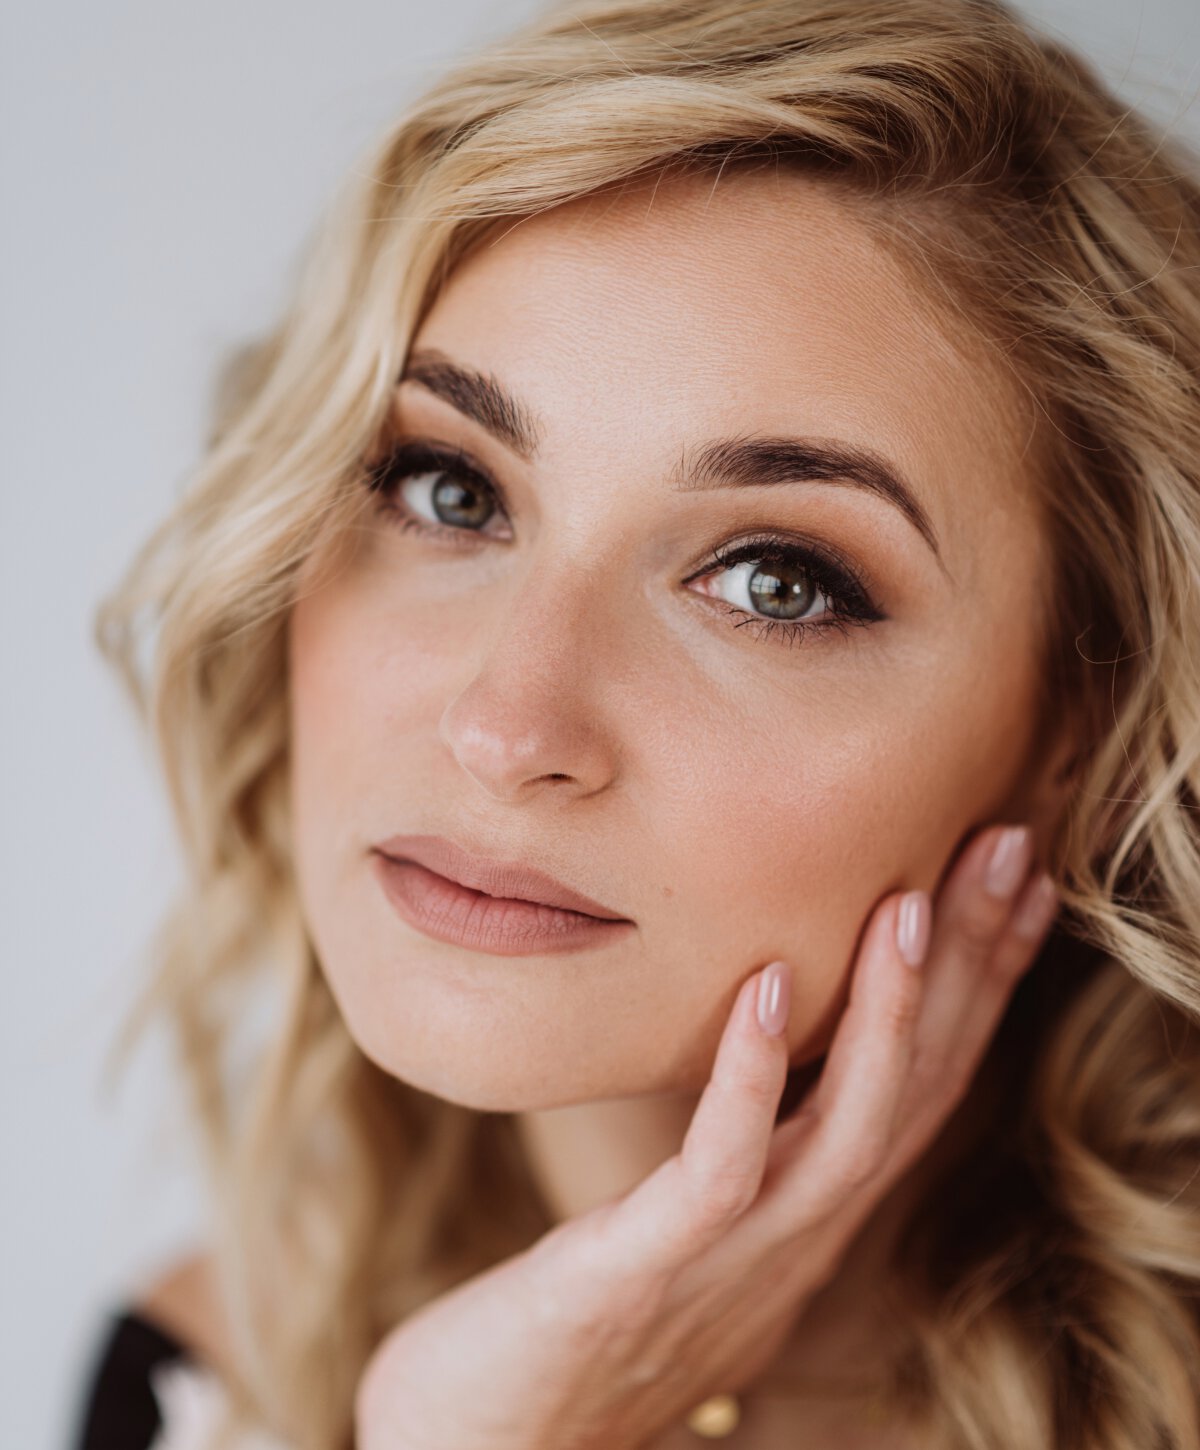 Los Angeles neck lift model with blonde hair, looking forward